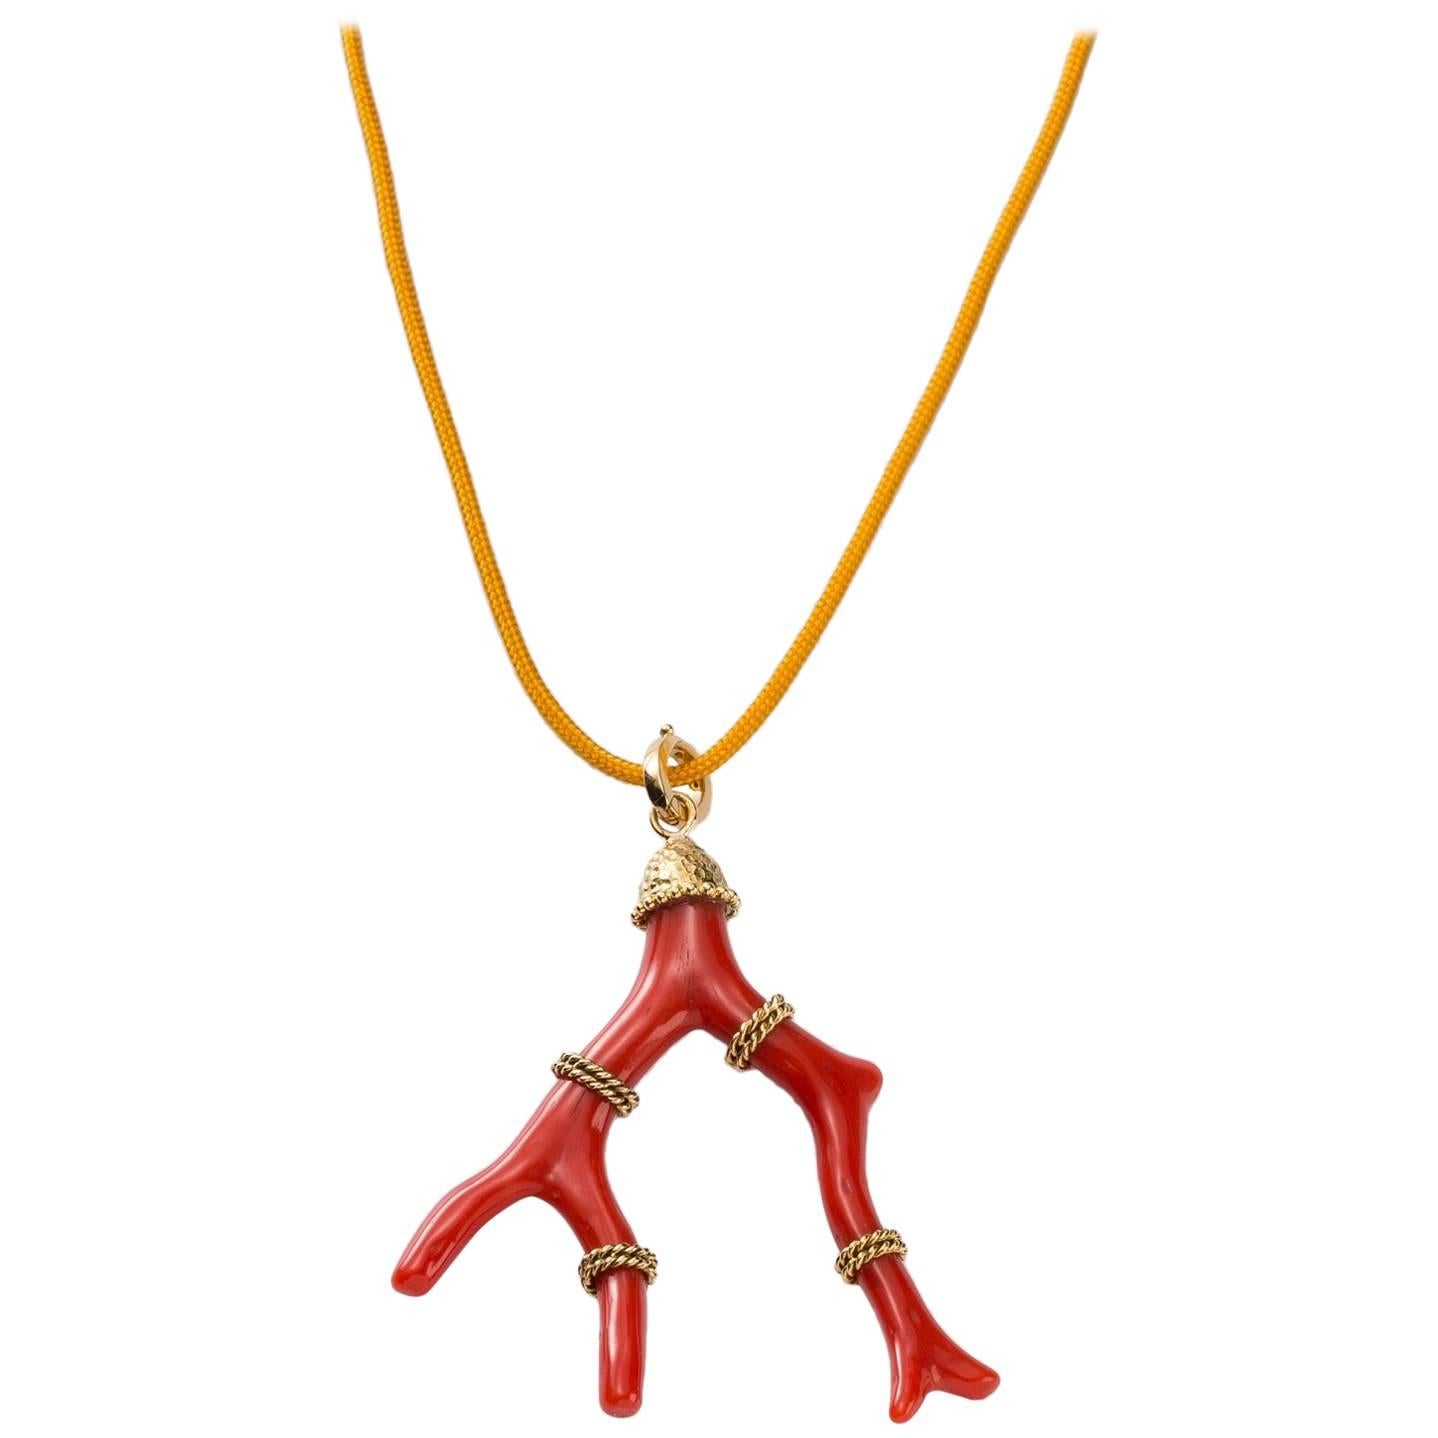 Sardinian Branch Coral Pendant Handcrafted with Hand-Hammered 18 Karat Gold